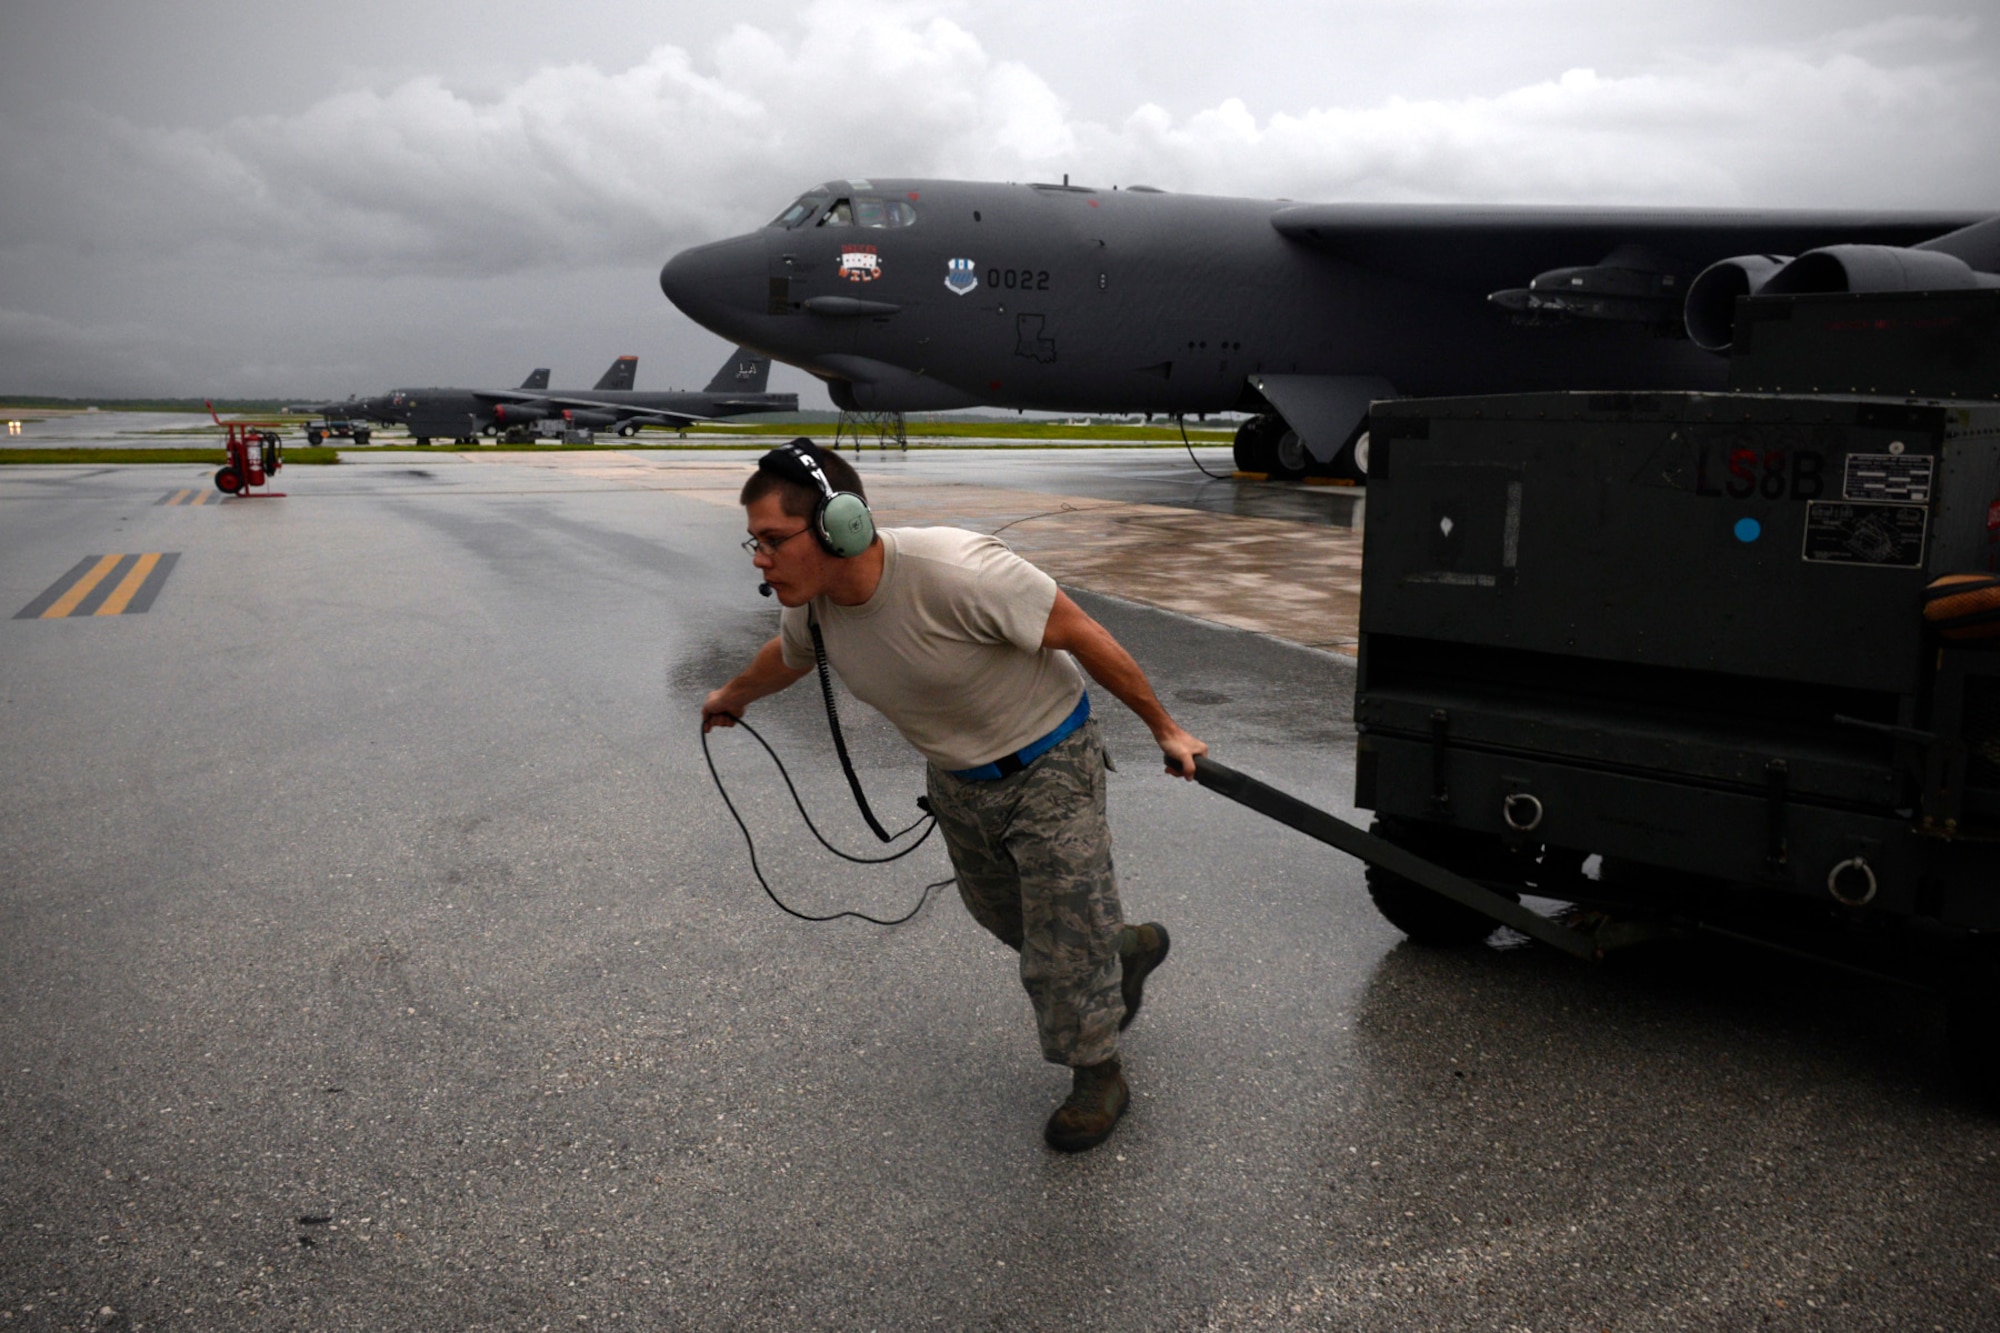 Staff Sgt. Stephen Cole, B-52 Stratofortress crew chief assigned to the 20th Expeditionary Aircraft Maintenance Squadron, moves ground equipment during aircraft launch operations Aug. 22, 2015, at Andersen Air Force Base, Guam.  Bomber crews with the 20th Expeditionary Bomb Squadron are part of U.S. Pacific Command’s continuous bomber presence and support ongoing operations in the Indo-Asia-Pacific region. (U.S. Air Force photo by Staff Sgt. Alexander W. Riedel/Released)